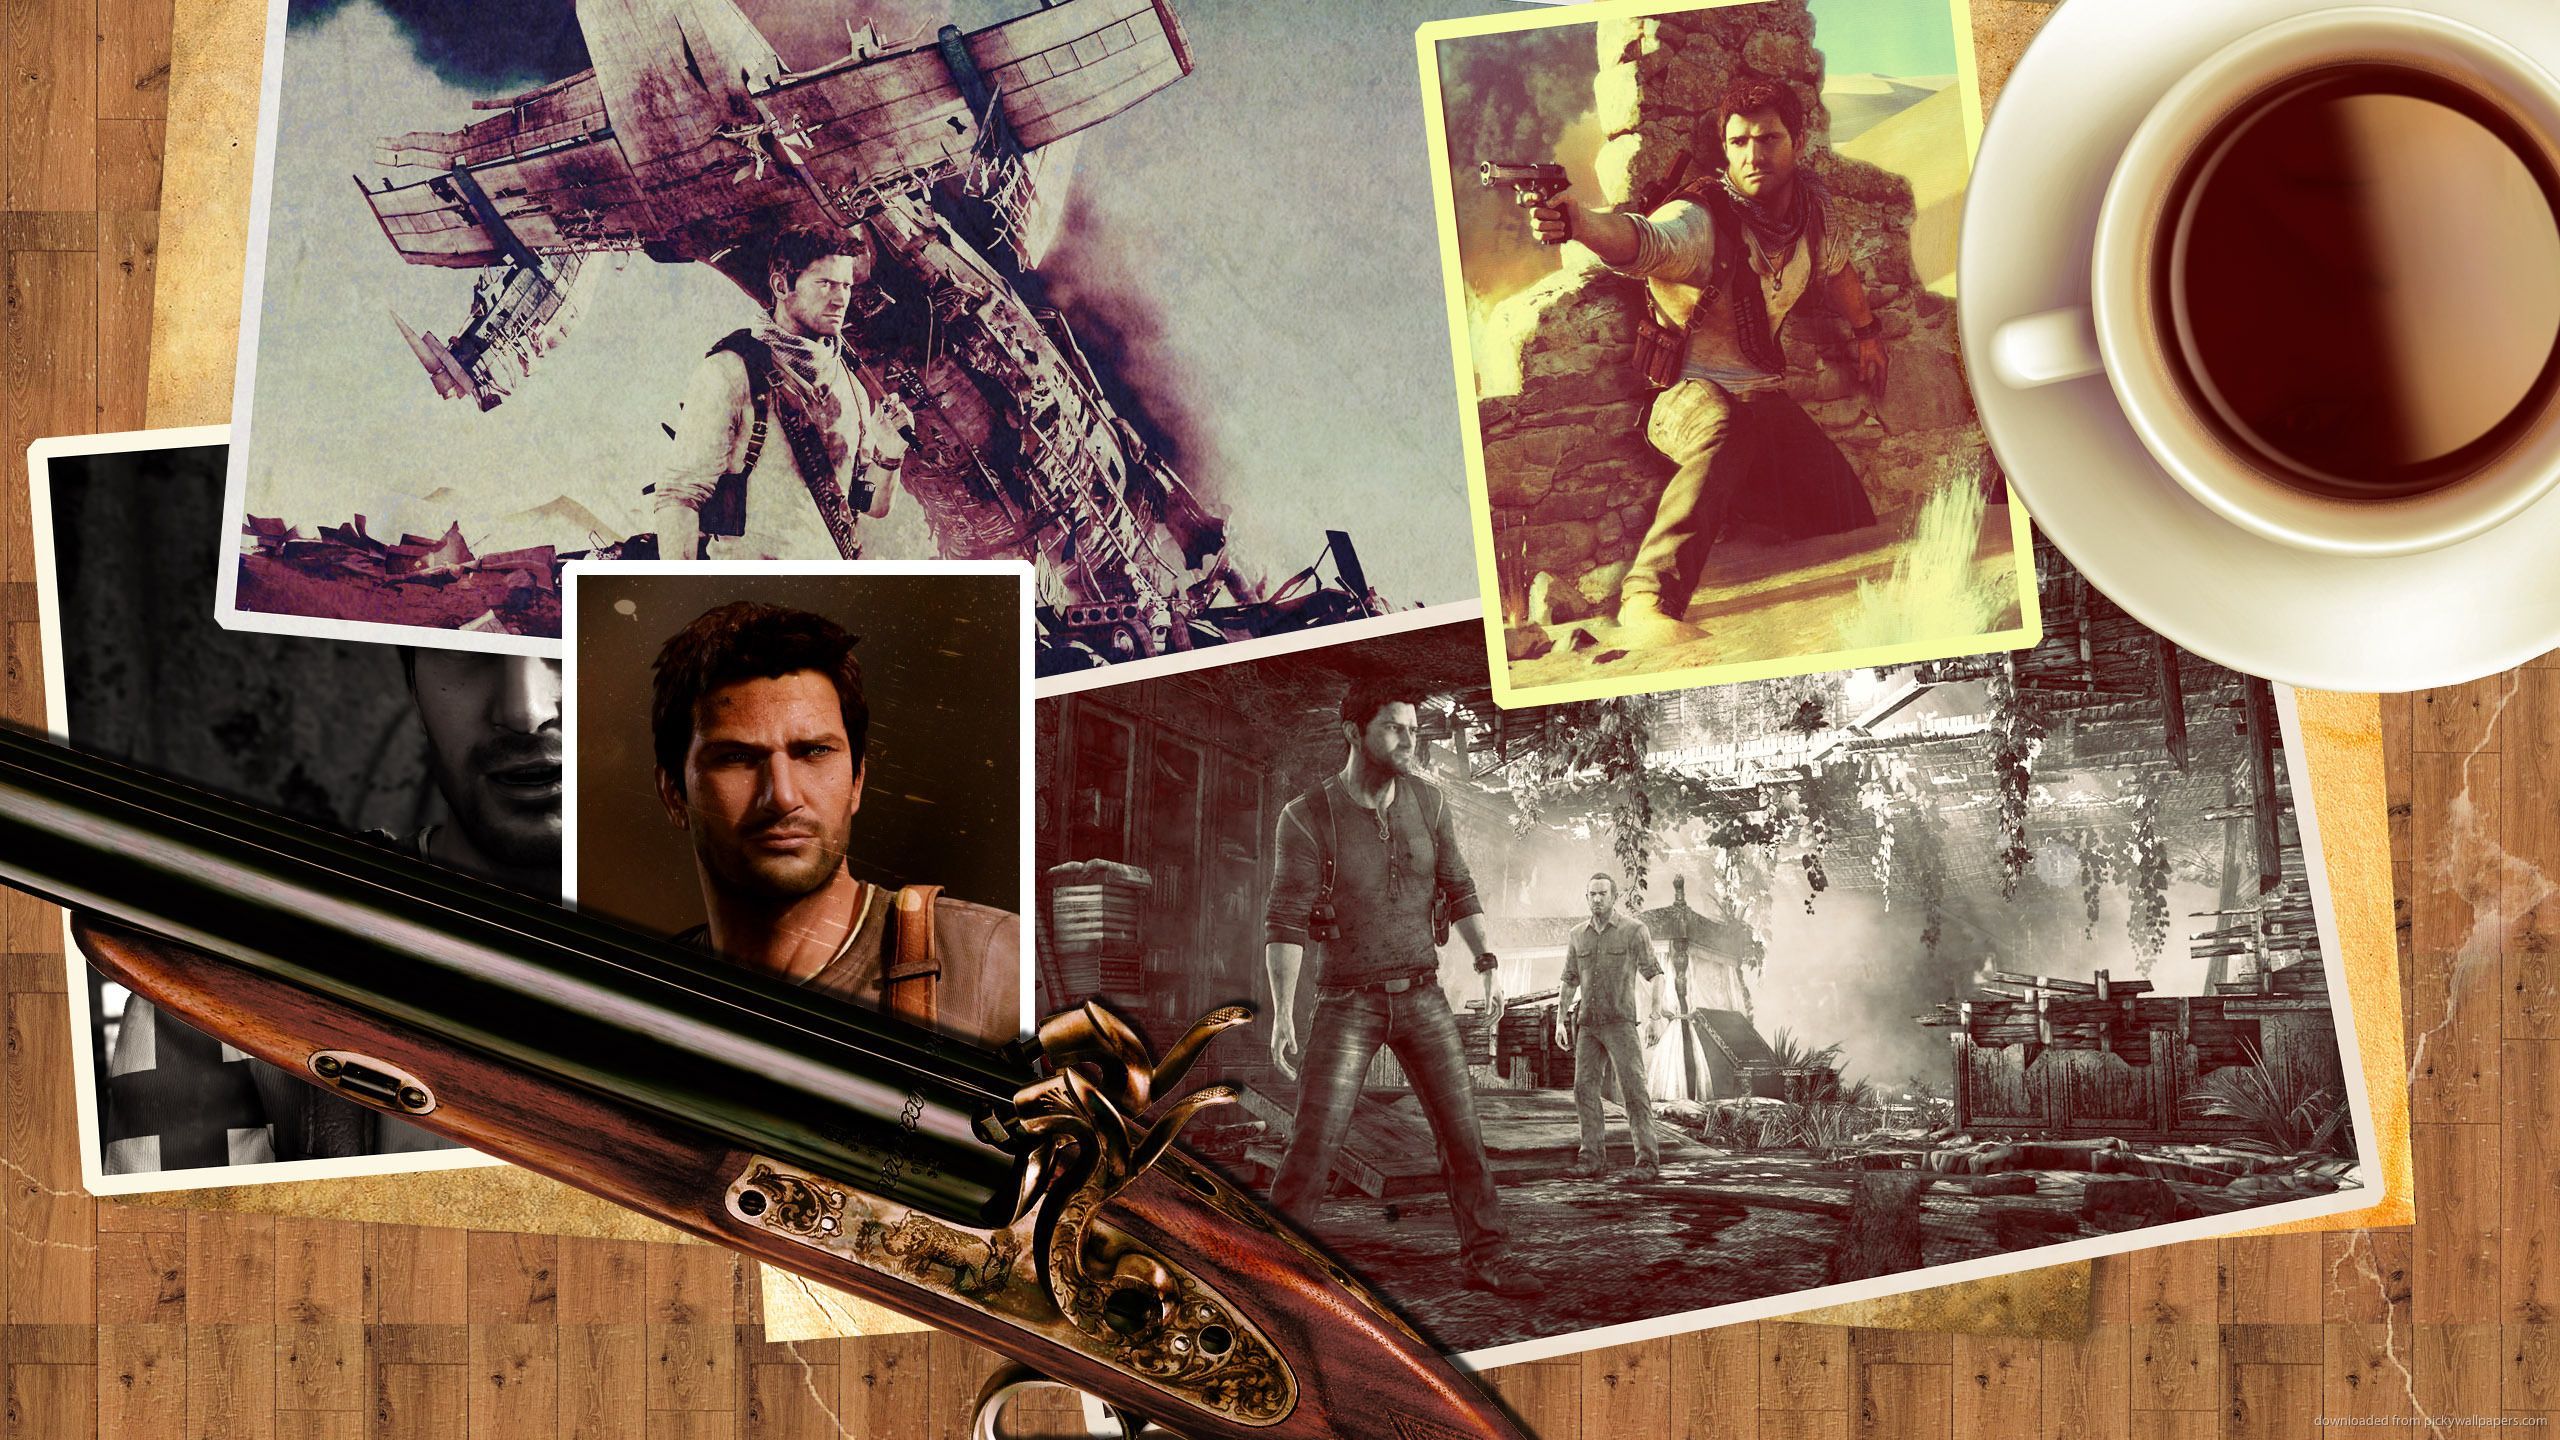 Download 2560x1440 Uncharted Coffee And Pistol Wallpaper